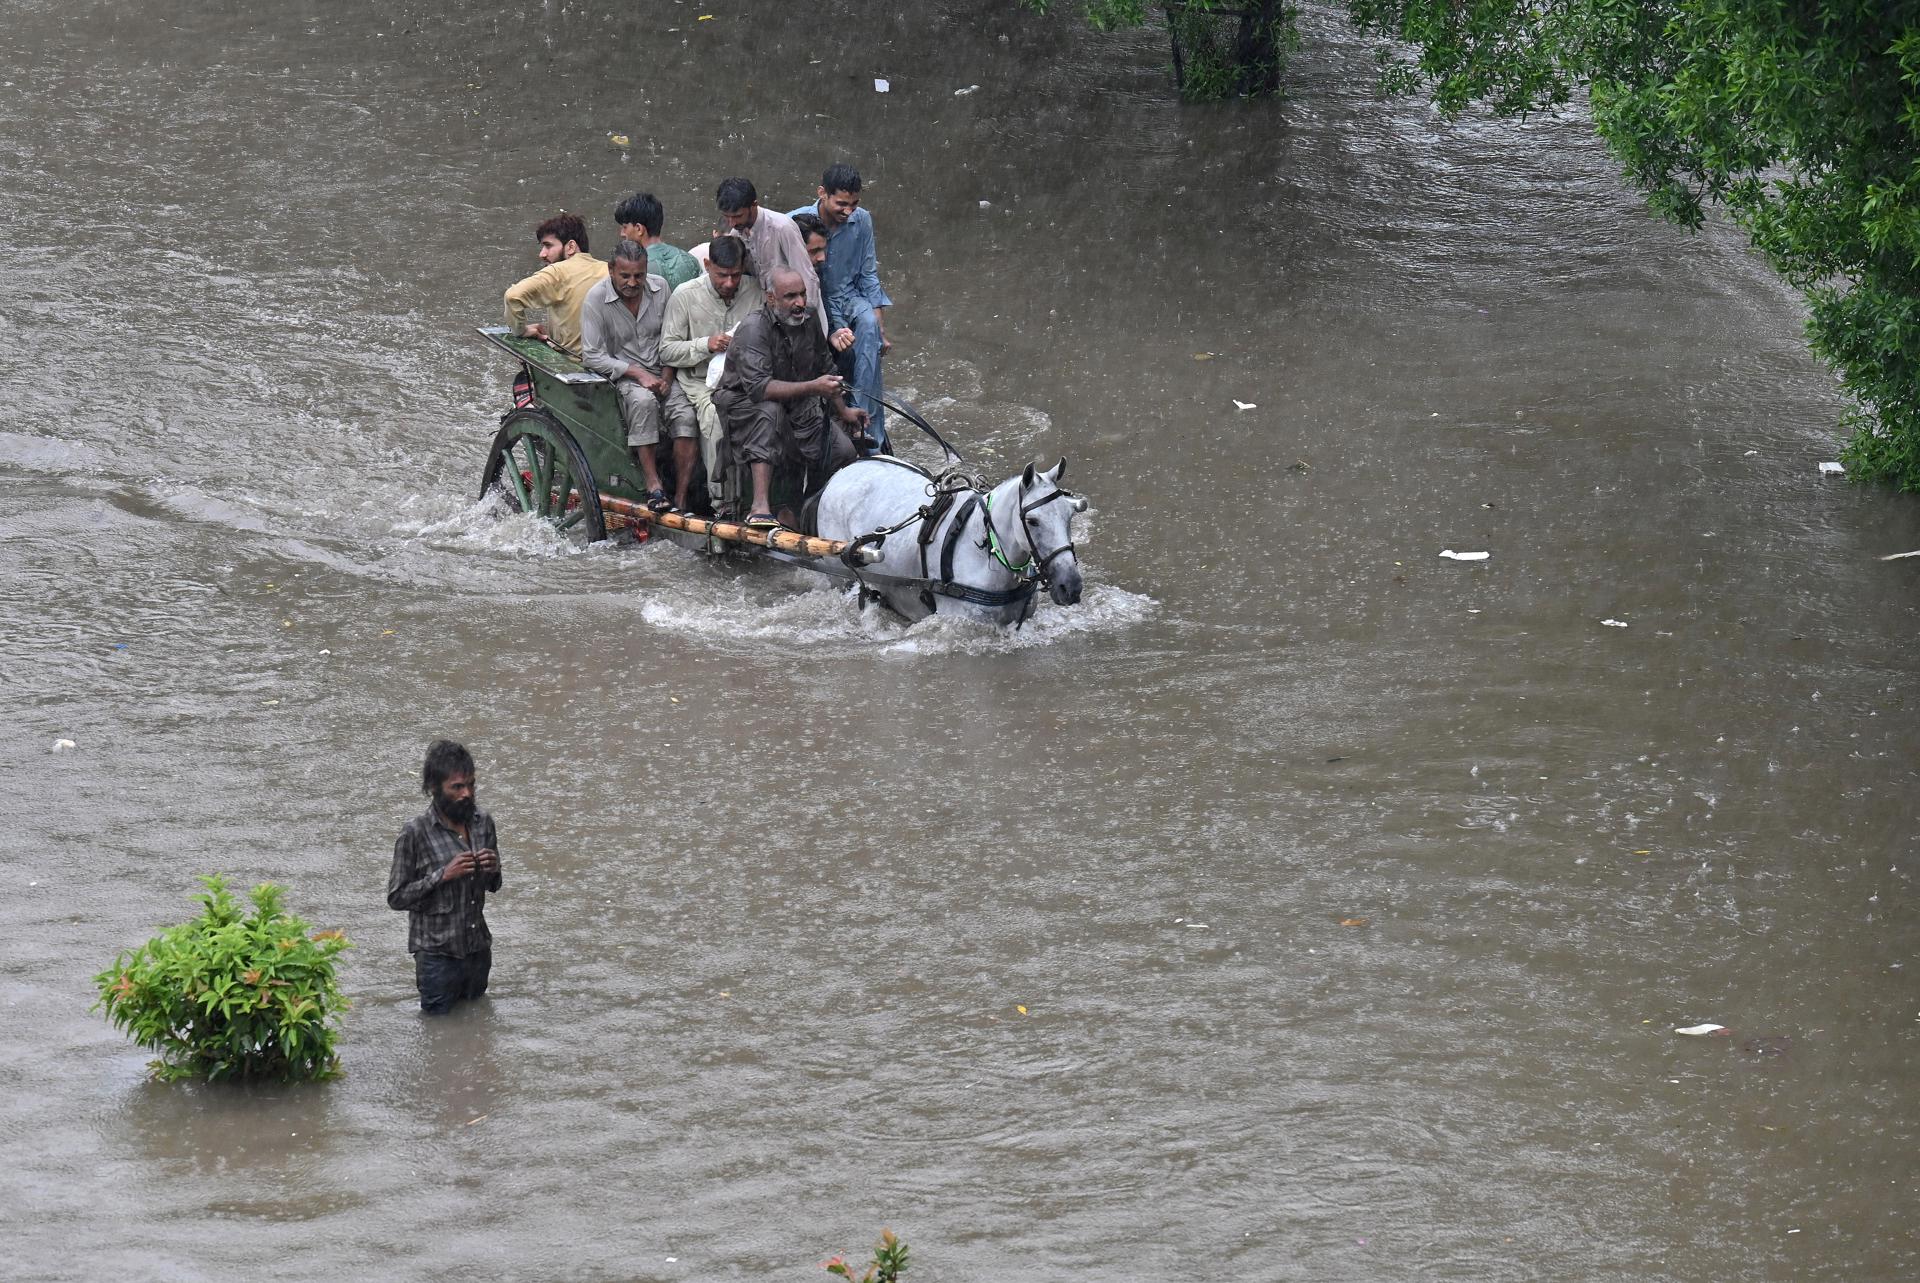 Lahore (Pakistan), 05/07/2023.- People ride a horse-drawn carriage through a flooded area following heavy rains in Lahore, Pakistan, 05 July 2023. Pakistan's Meteorological Department (PMD) has forecast monsoon rains for most parts of Punjab during the next few days, while bursts of heavy rains may cause urban flooding in major cities including Lahore. EFE/EPA/RAHAT DAR
